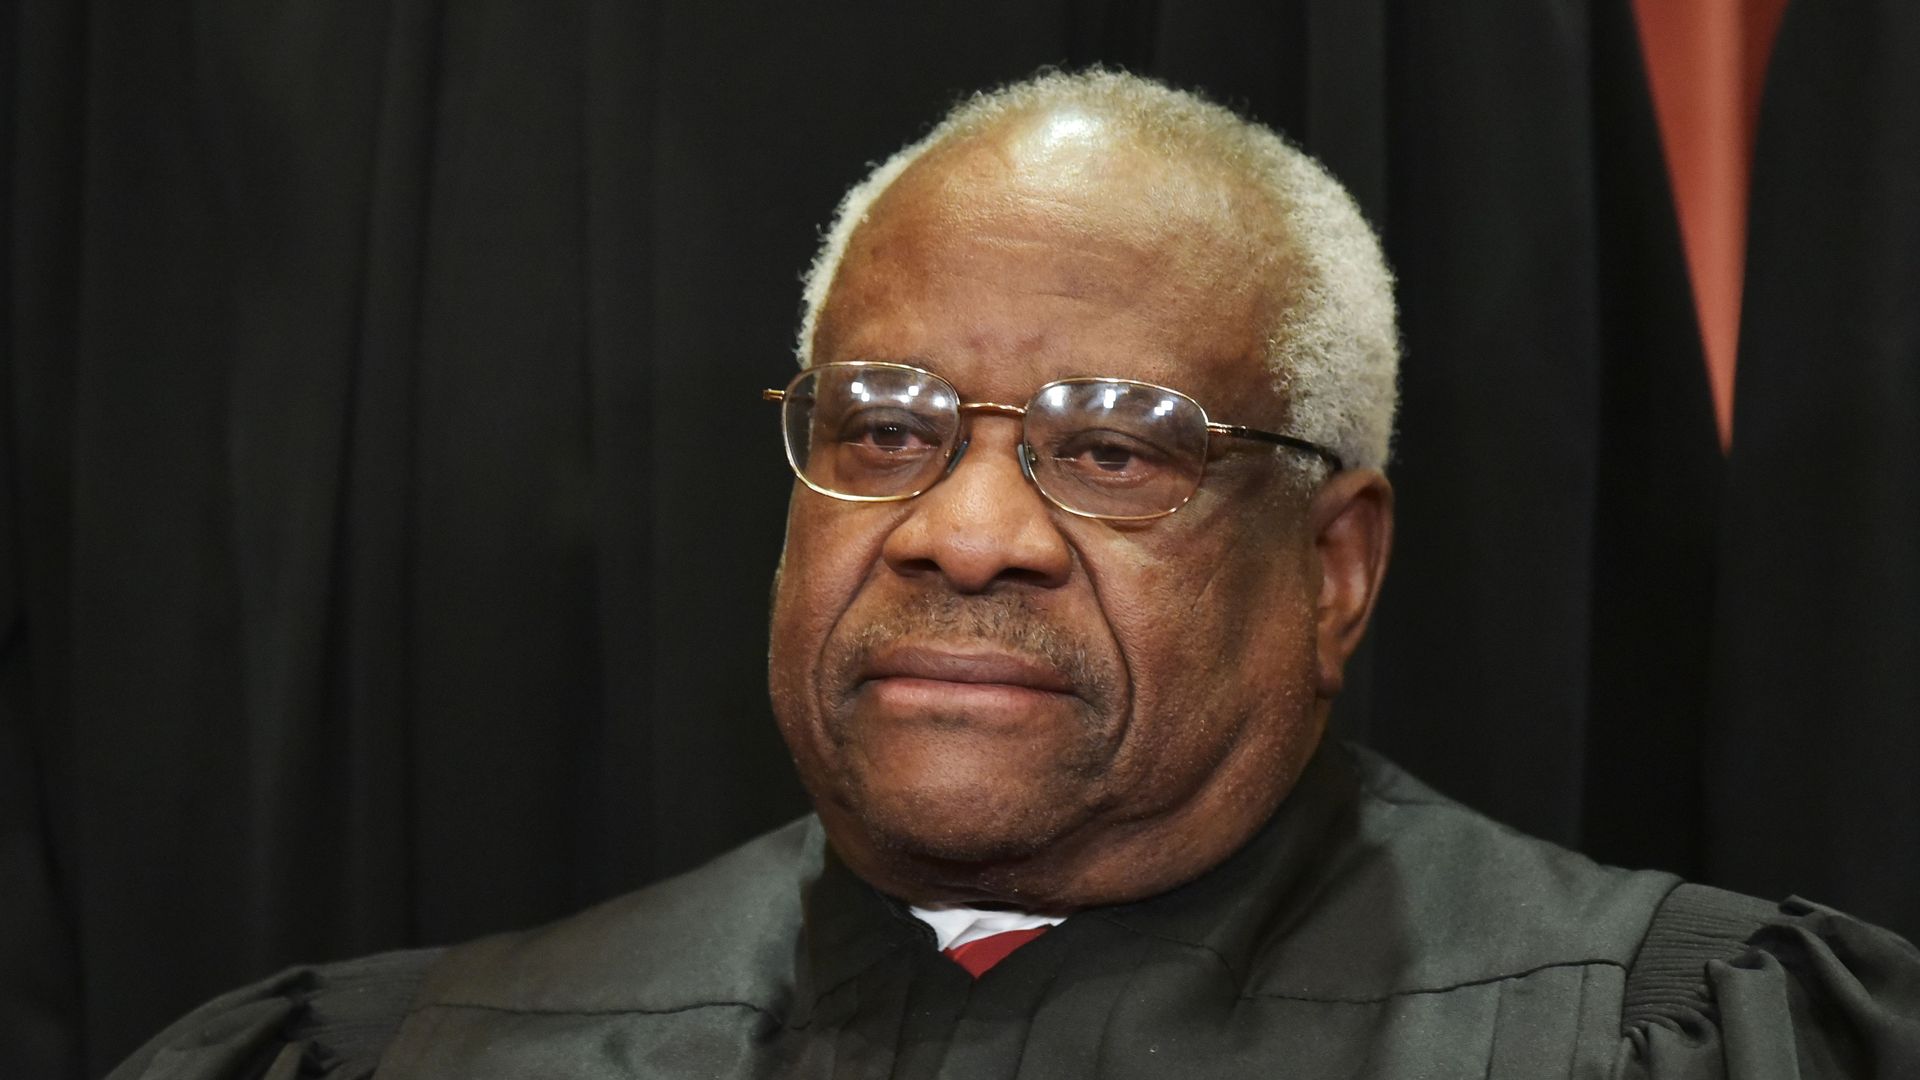 Photo of Clarence Thomas in his robes